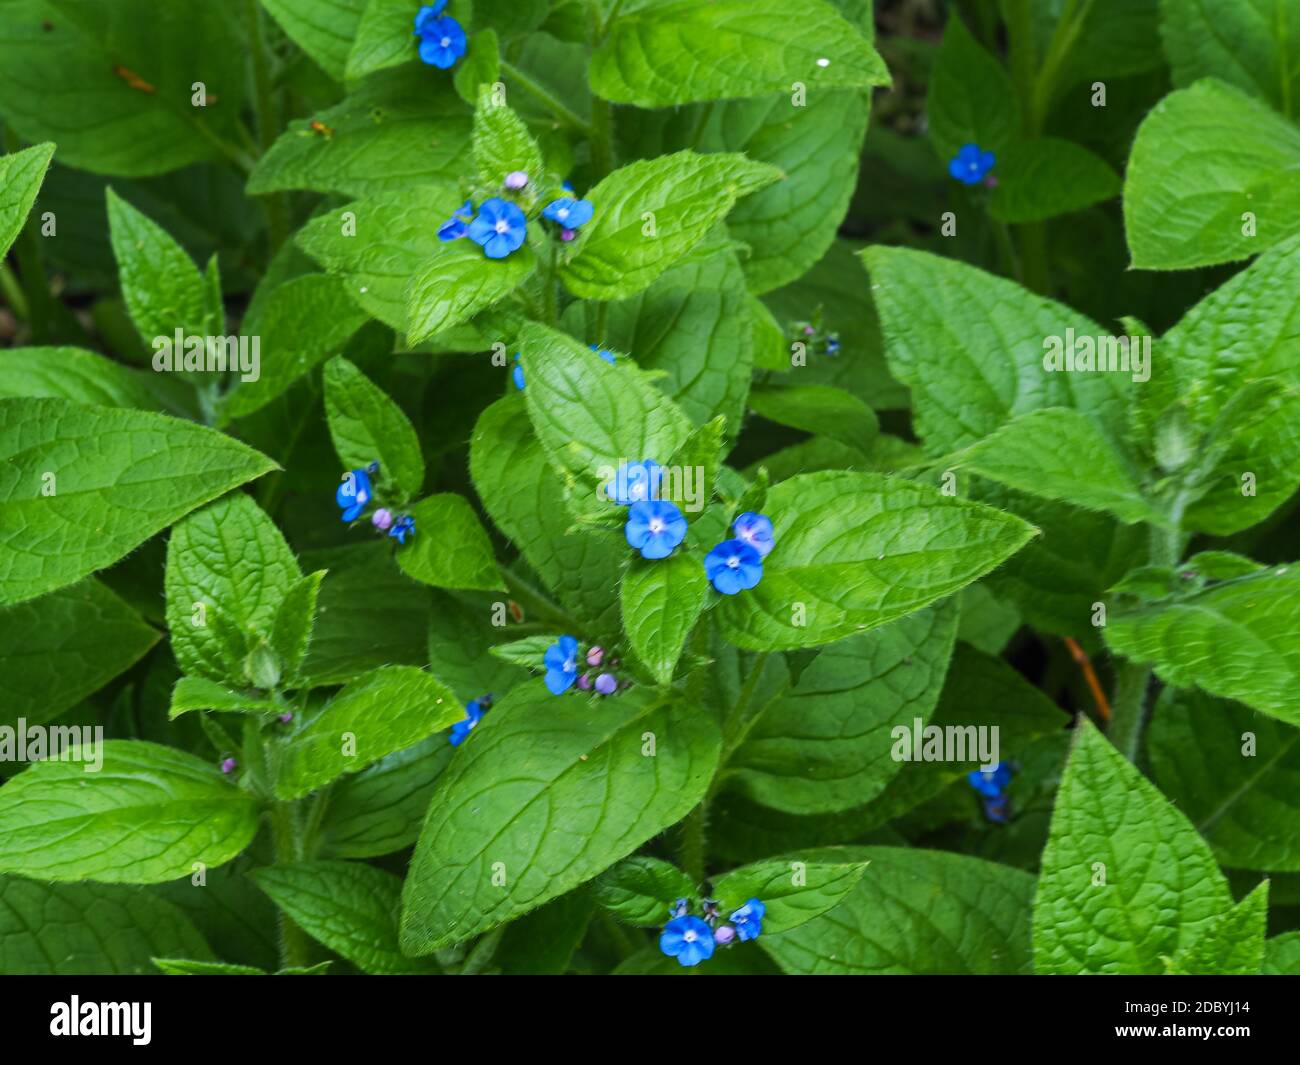 Green alkanet plant, Pentaglottis sempervirens, with blue flowers and green leaves Stock Photo